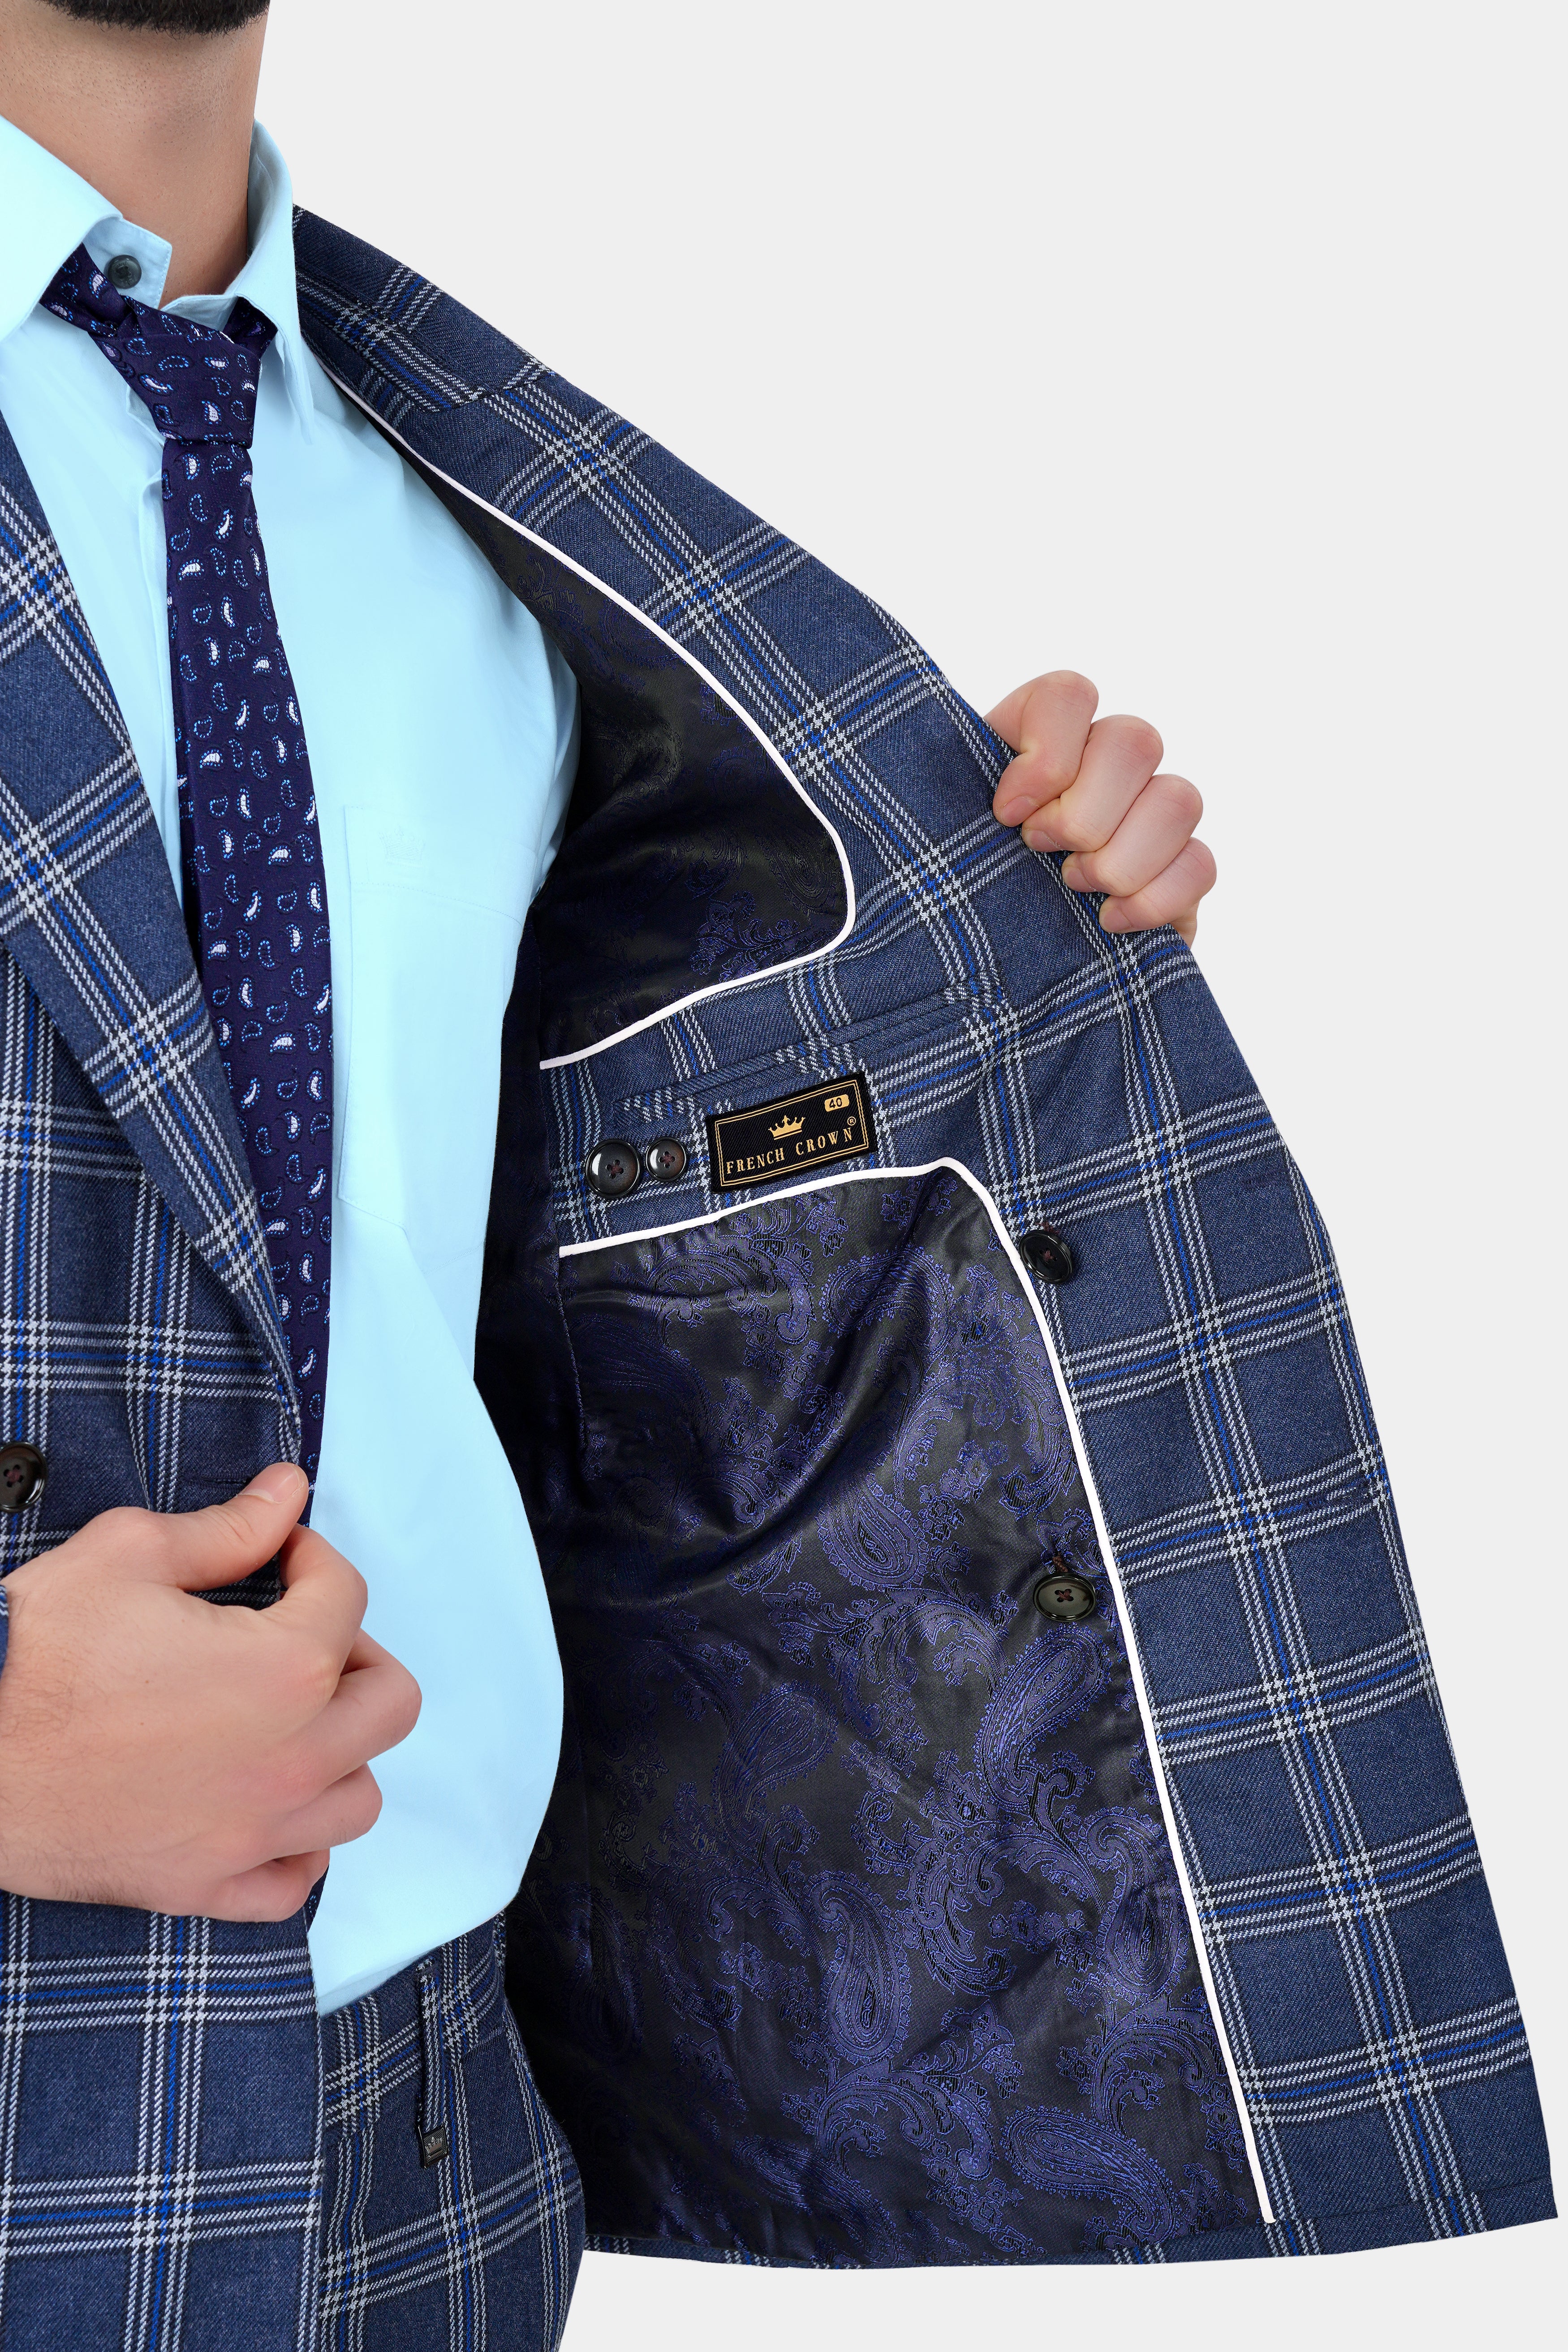 Cloud Blue and White Plaid Tweed Double Breasted Blazer BL3130-DB-PP-36, BL3130-DB-PP-38, BL3130-DB-PP-40, BL3130-DB-PP-42, BL3130-DB-PP-44, BL3130-DB-PP-46, BL3130-DB-PP-48, BL3130-DB-PP-50, BL3130-DB-PP-52, BL3130-DB-PP-54, BL3130-DB-PP-56, BL3130-DB-PP-58, BL3130-DB-PP-60